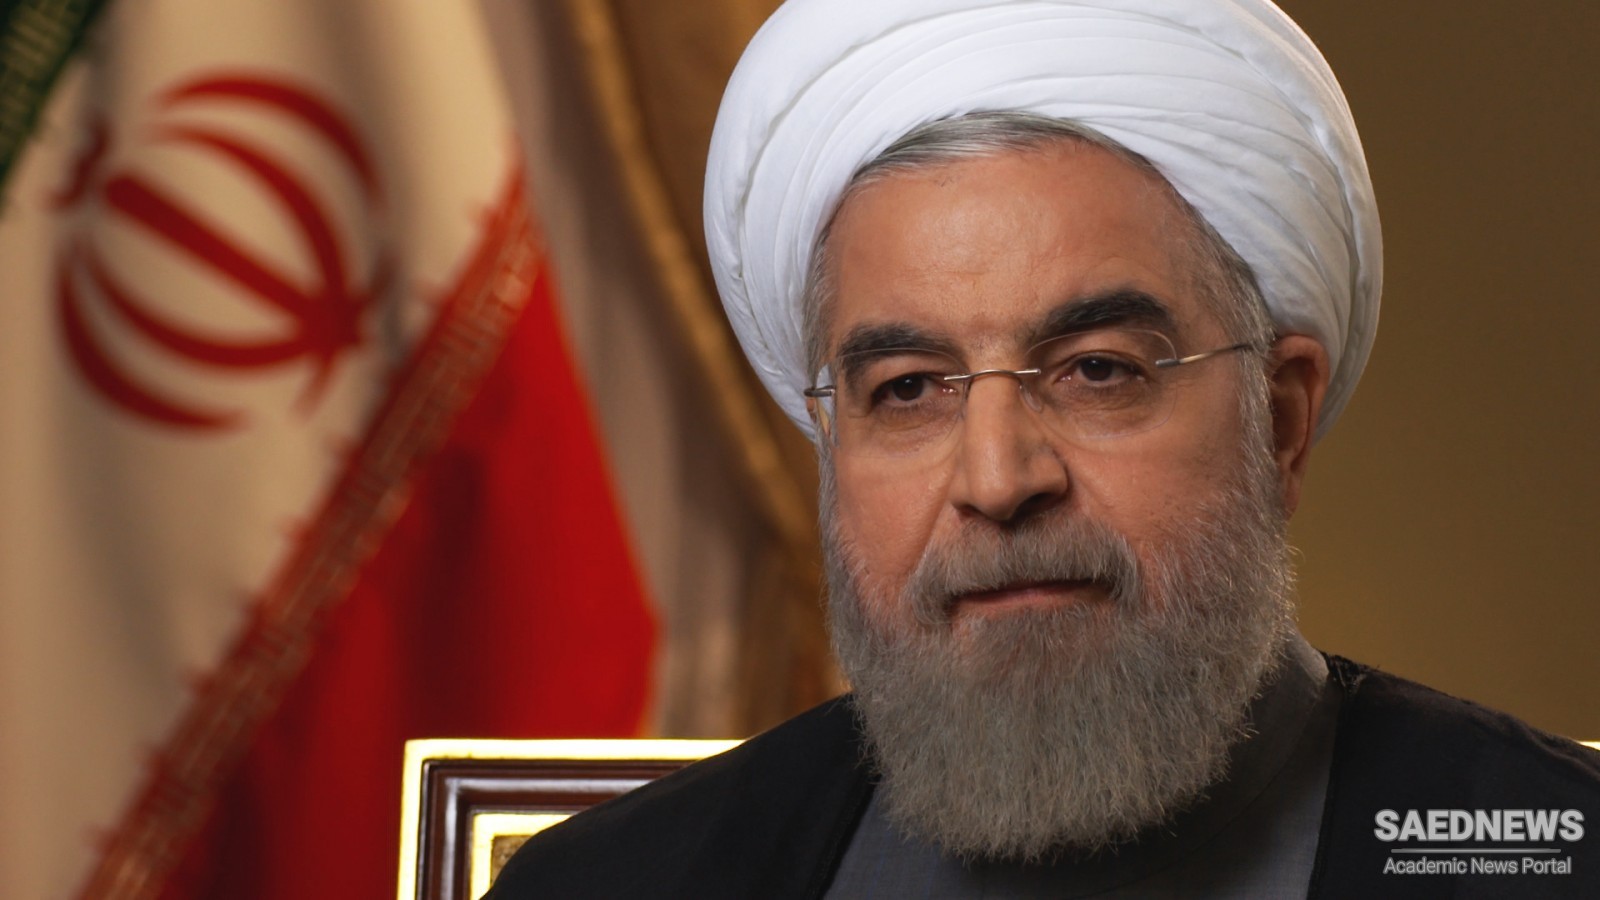 Iranians Are Not Going to Be Used for Trial of Foreign Vaccines, Iran President Hassan Rouhani Says